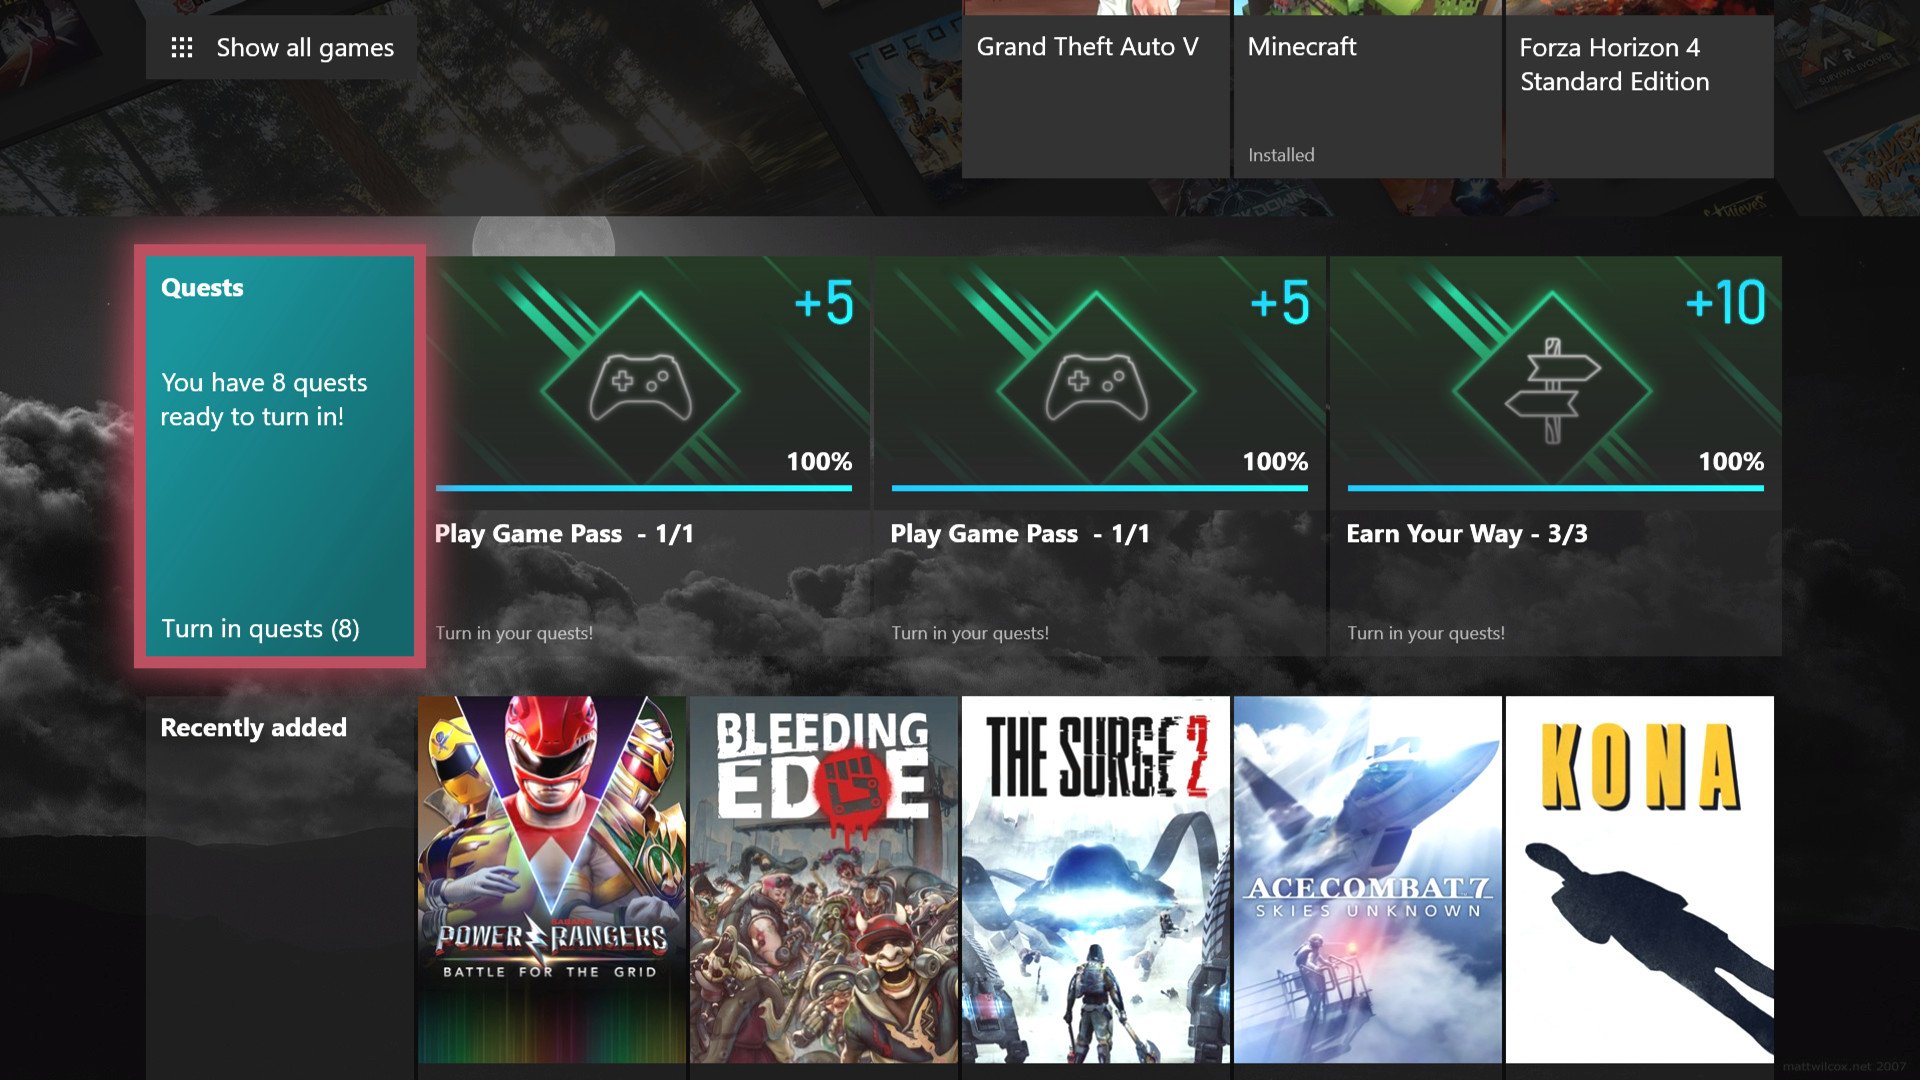 You can now download Xbox Game Pass for PC(Beta) app - MSPoweruser